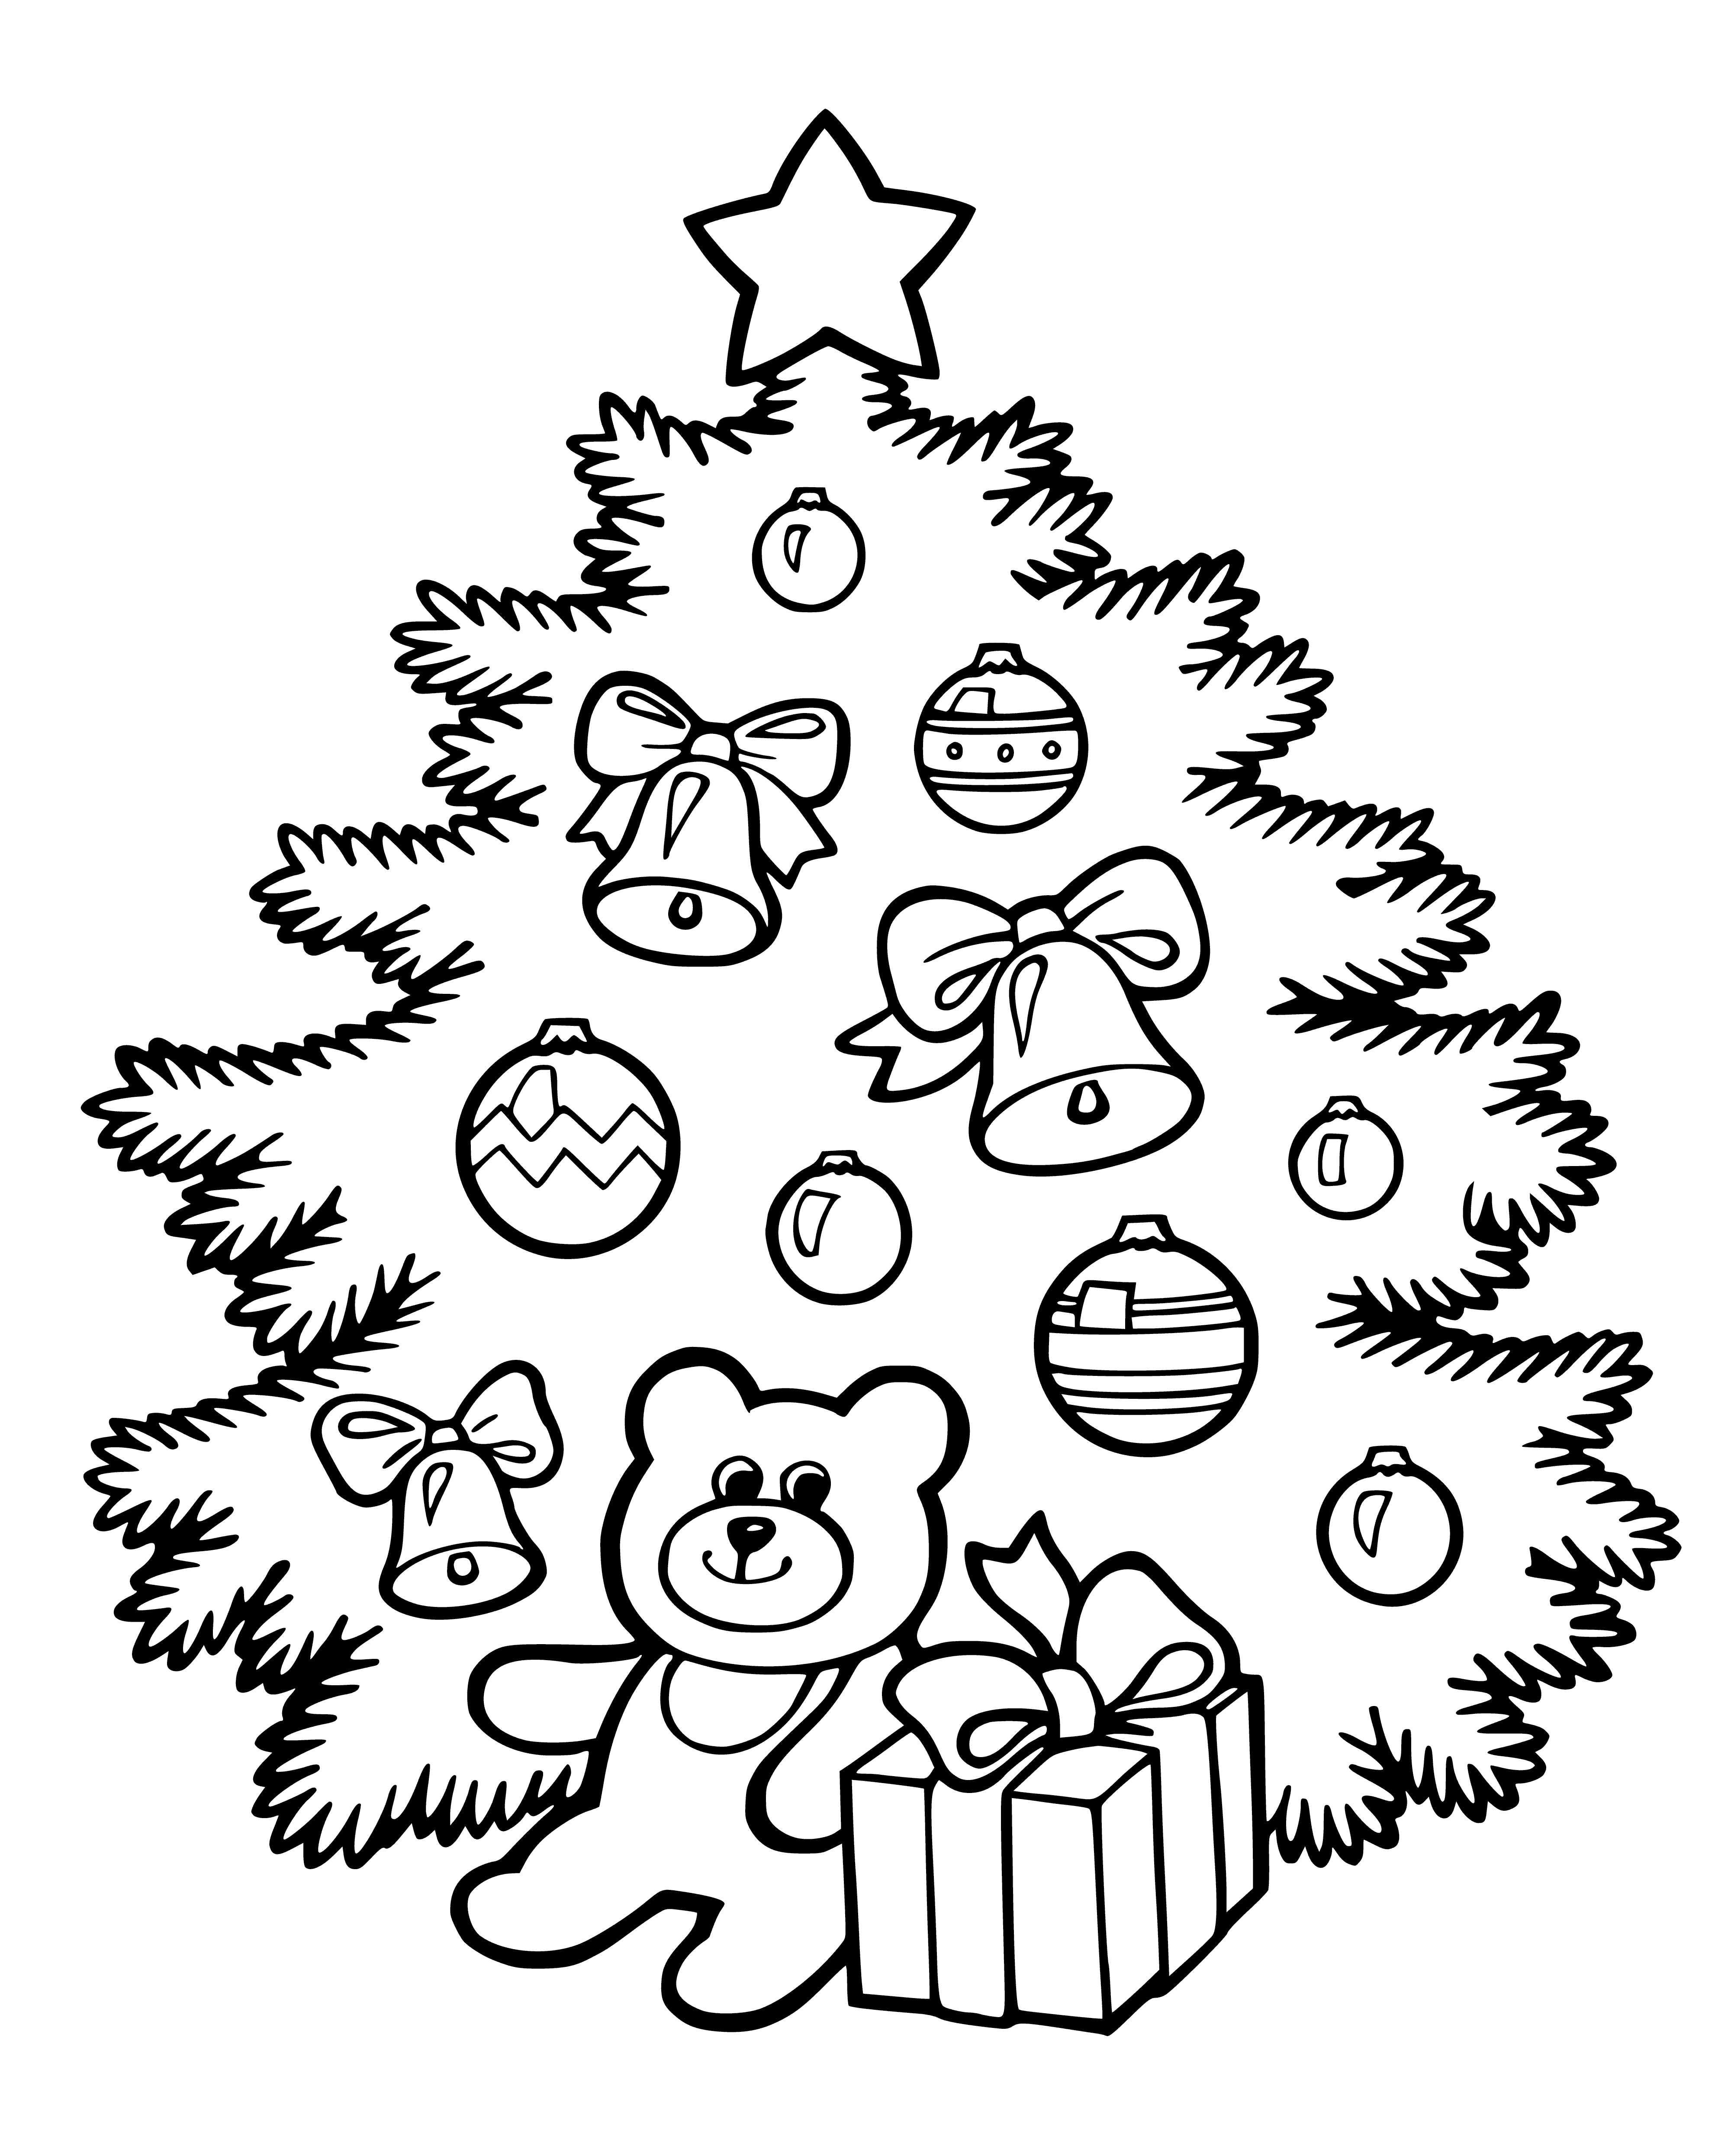 coloring page: Make an elegant, herringbone Christmas tree design with these intricate coloring pages! Perfect for a holiday decoration or getting into the spirit.